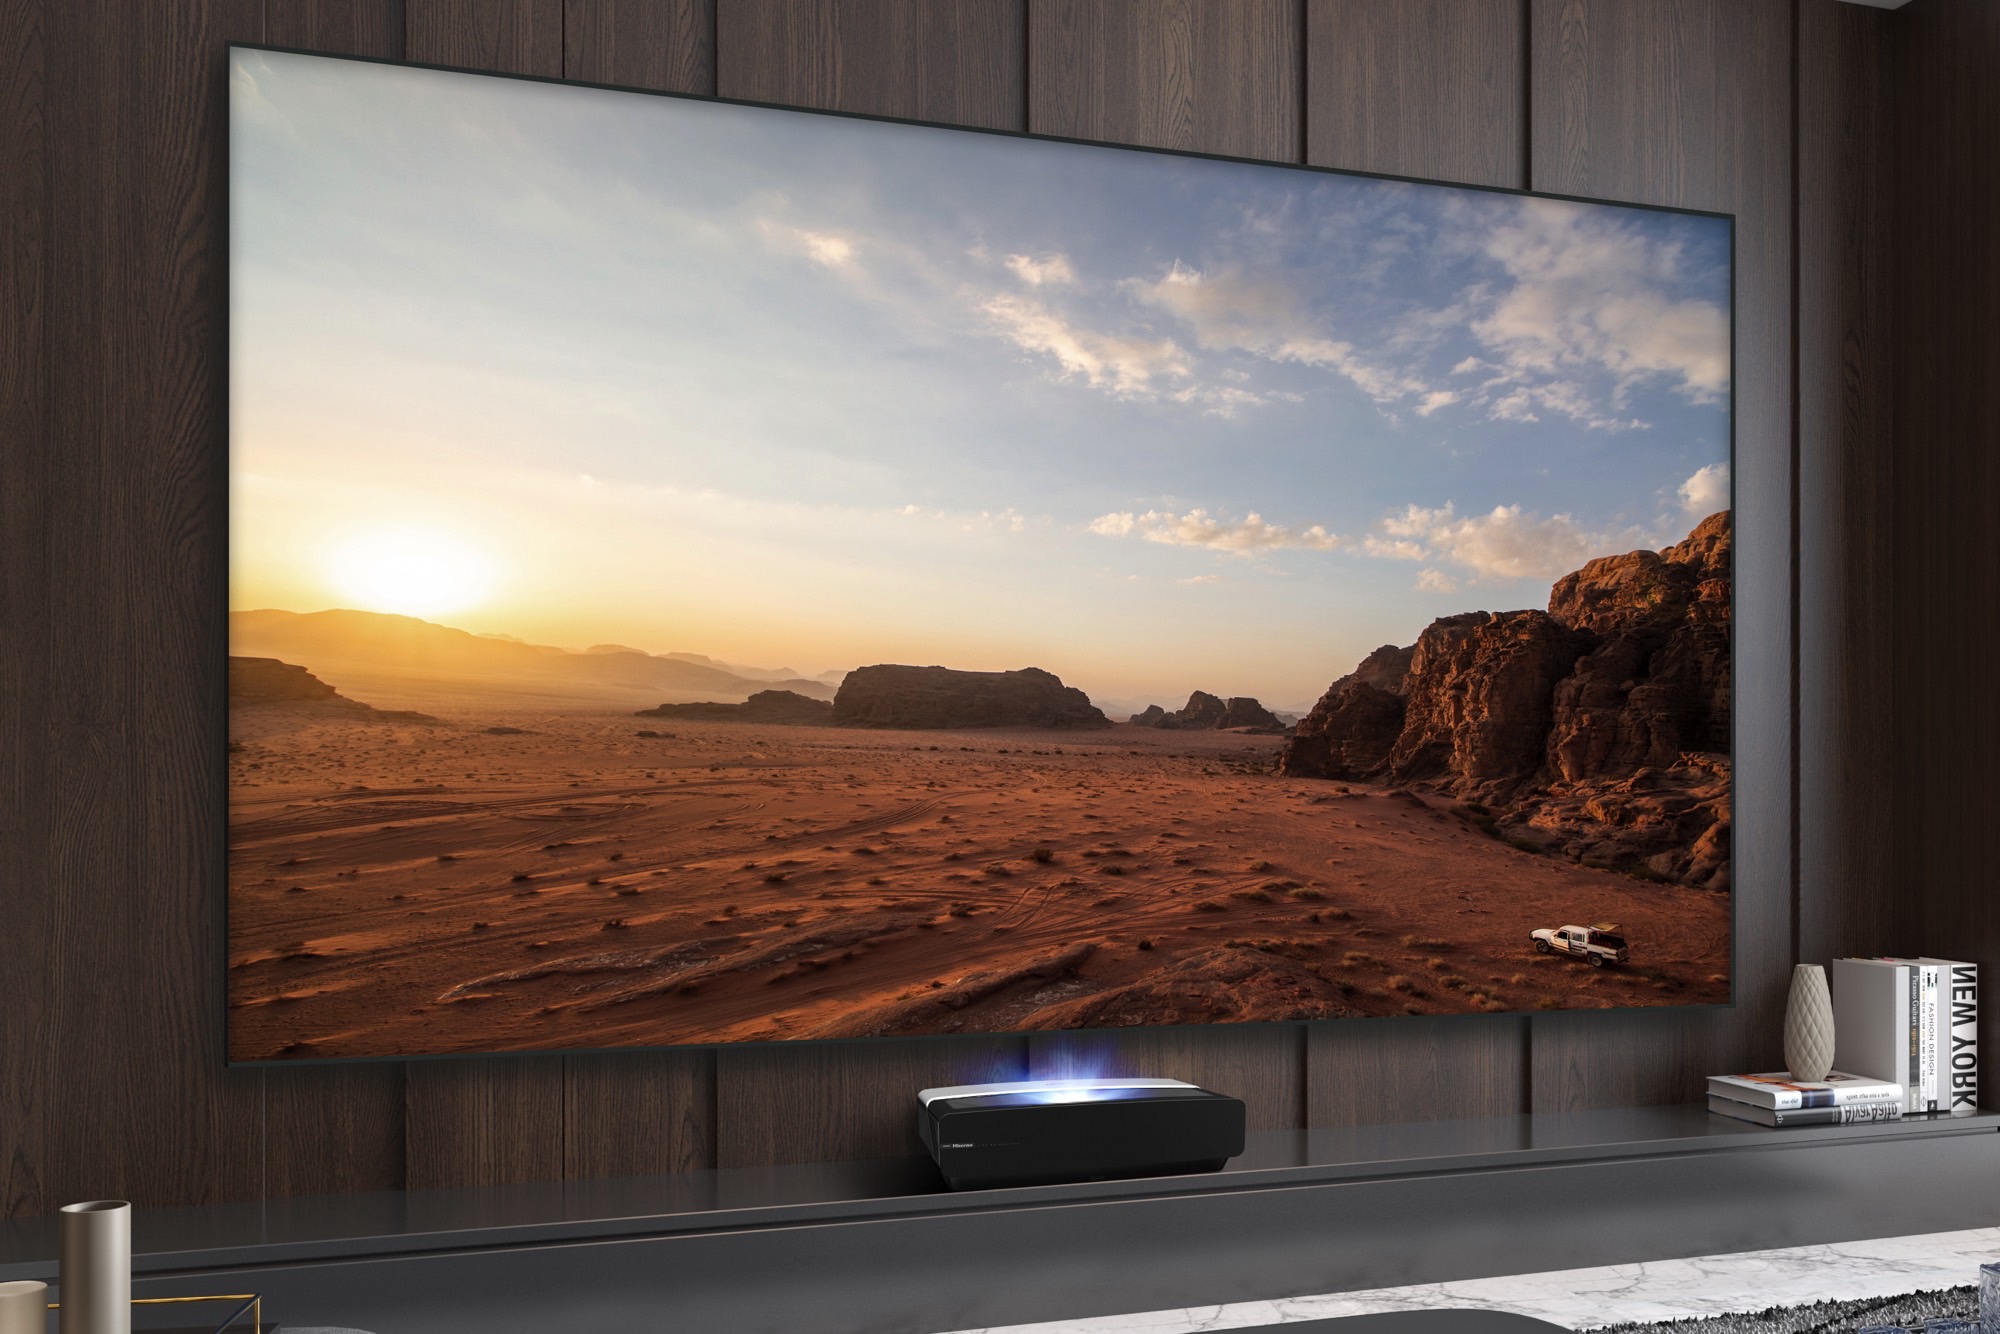 Huge 100-inch 4K Laser TV: 100 Inches for Less $$$, If you want to scale  your screen, you might want to consider a laser TV